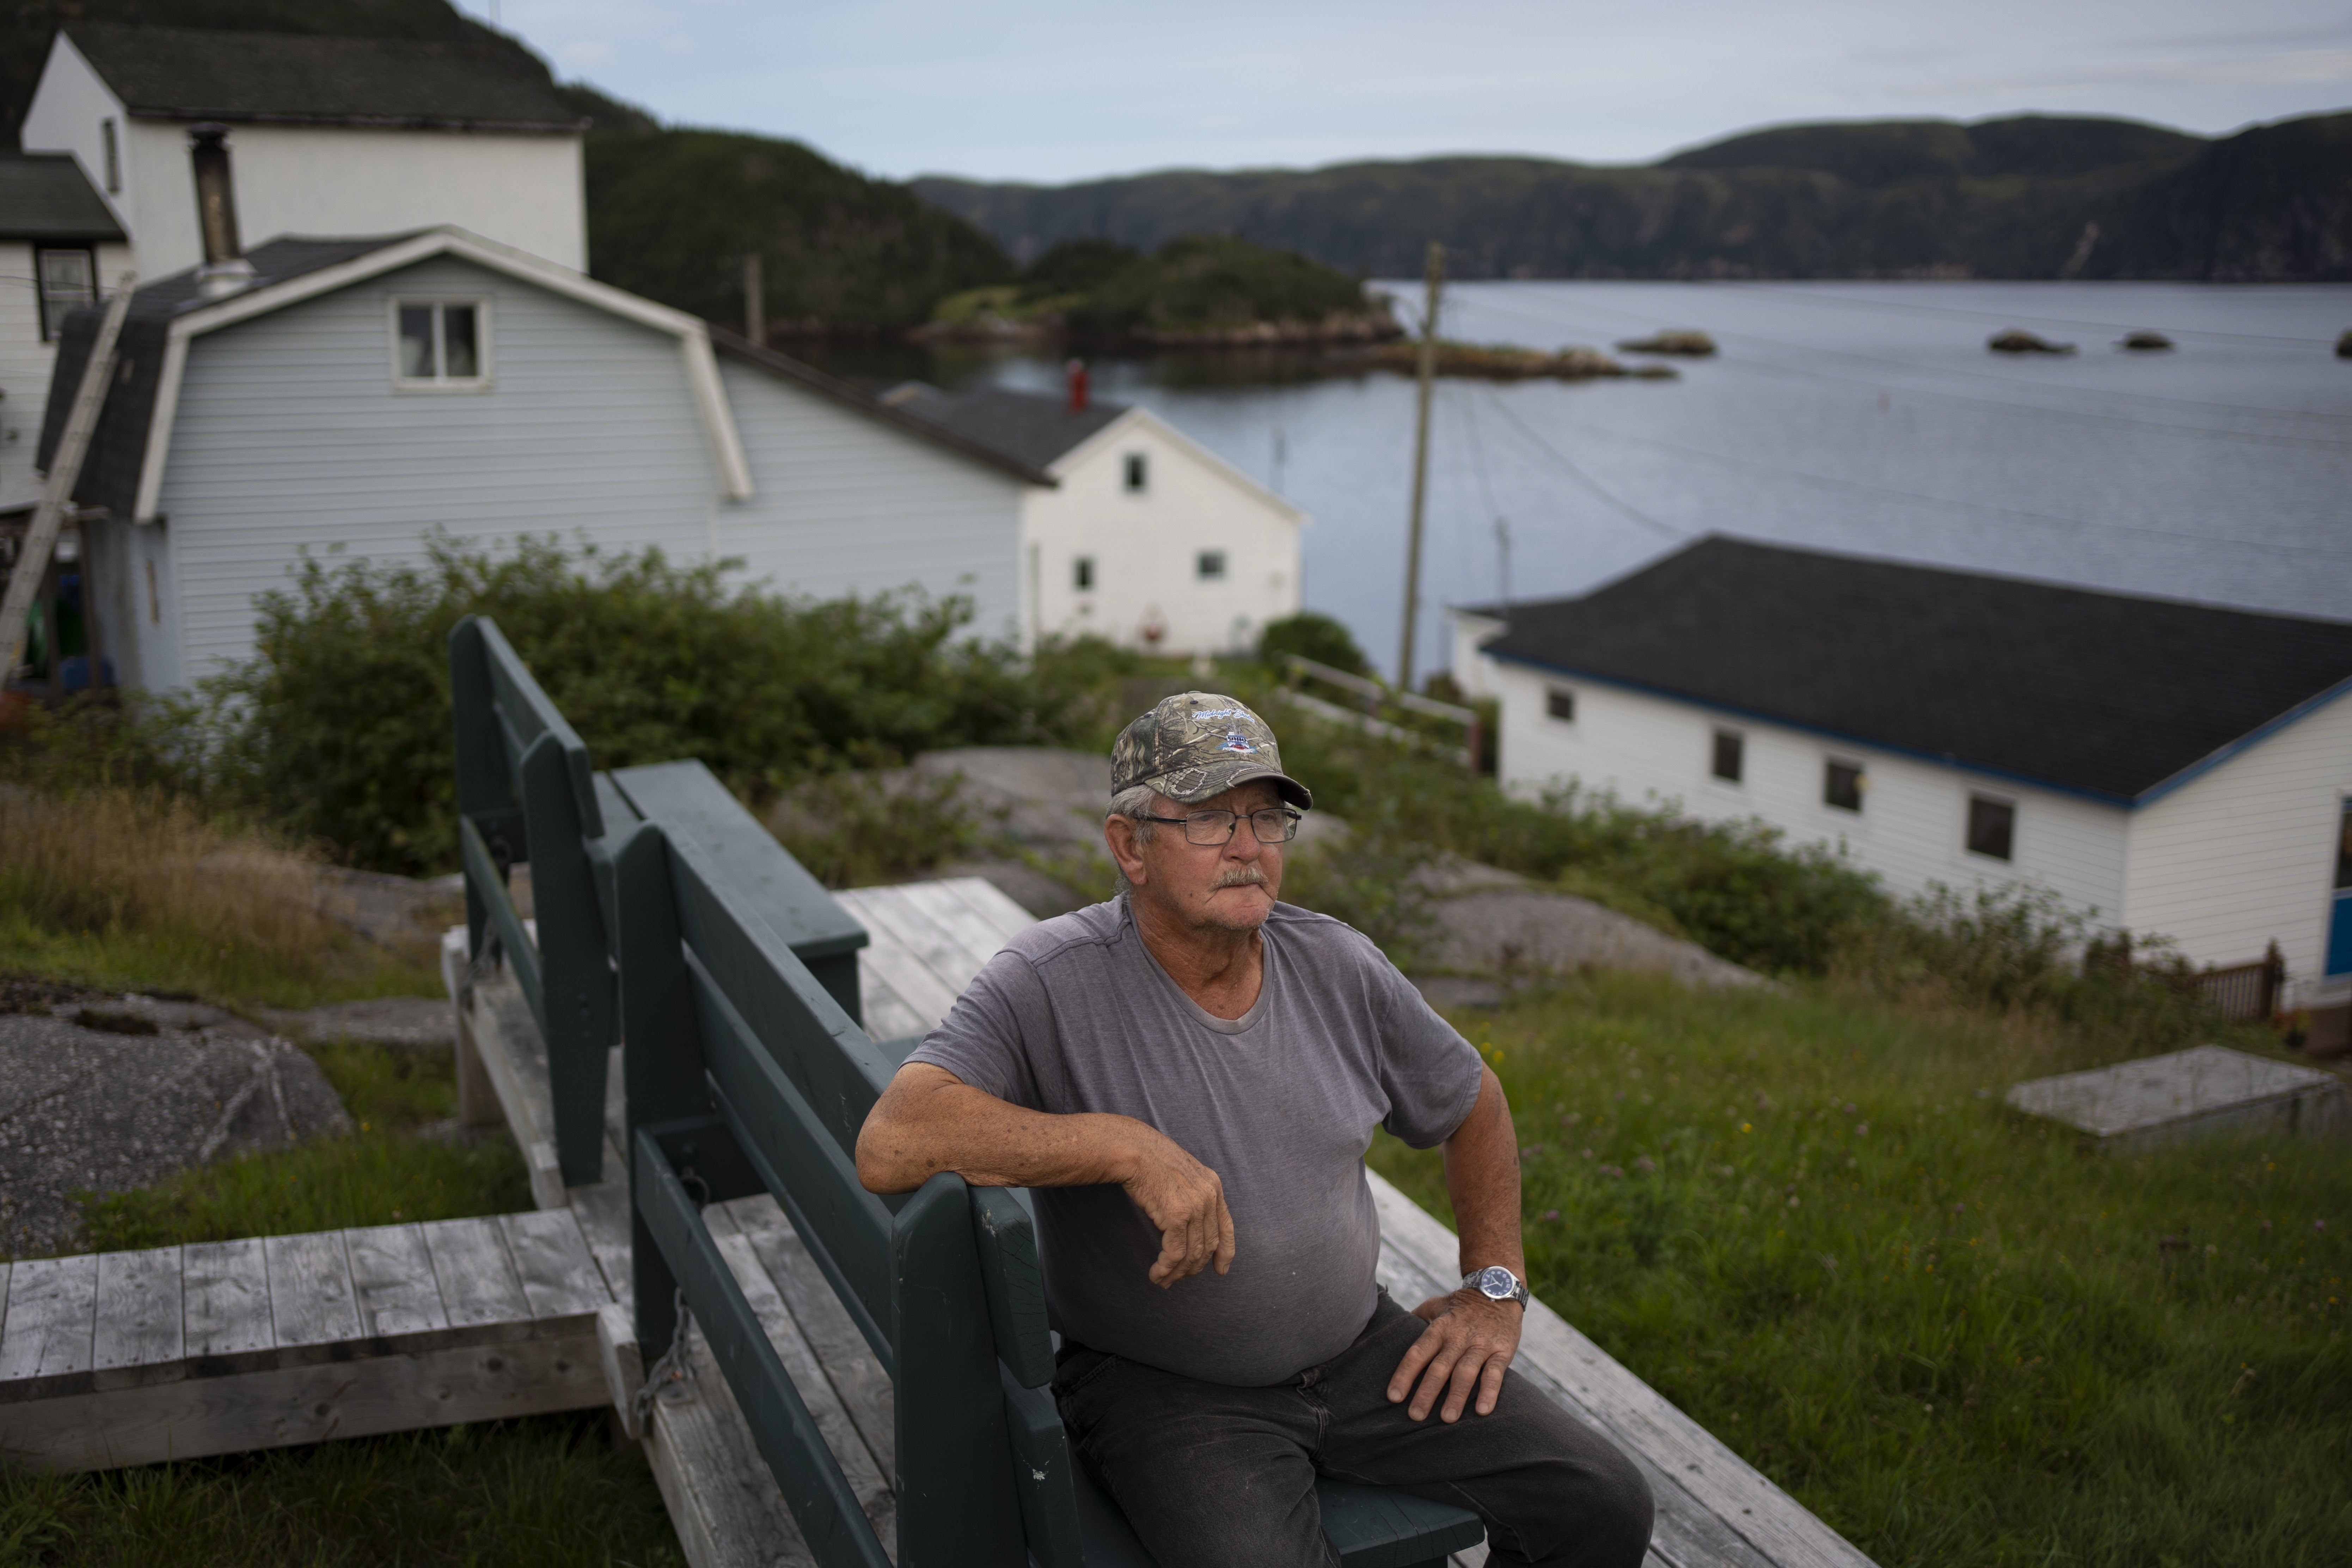 LA POILE – (A Remote Newfoundland Settlement) – Where My Boots Have Been